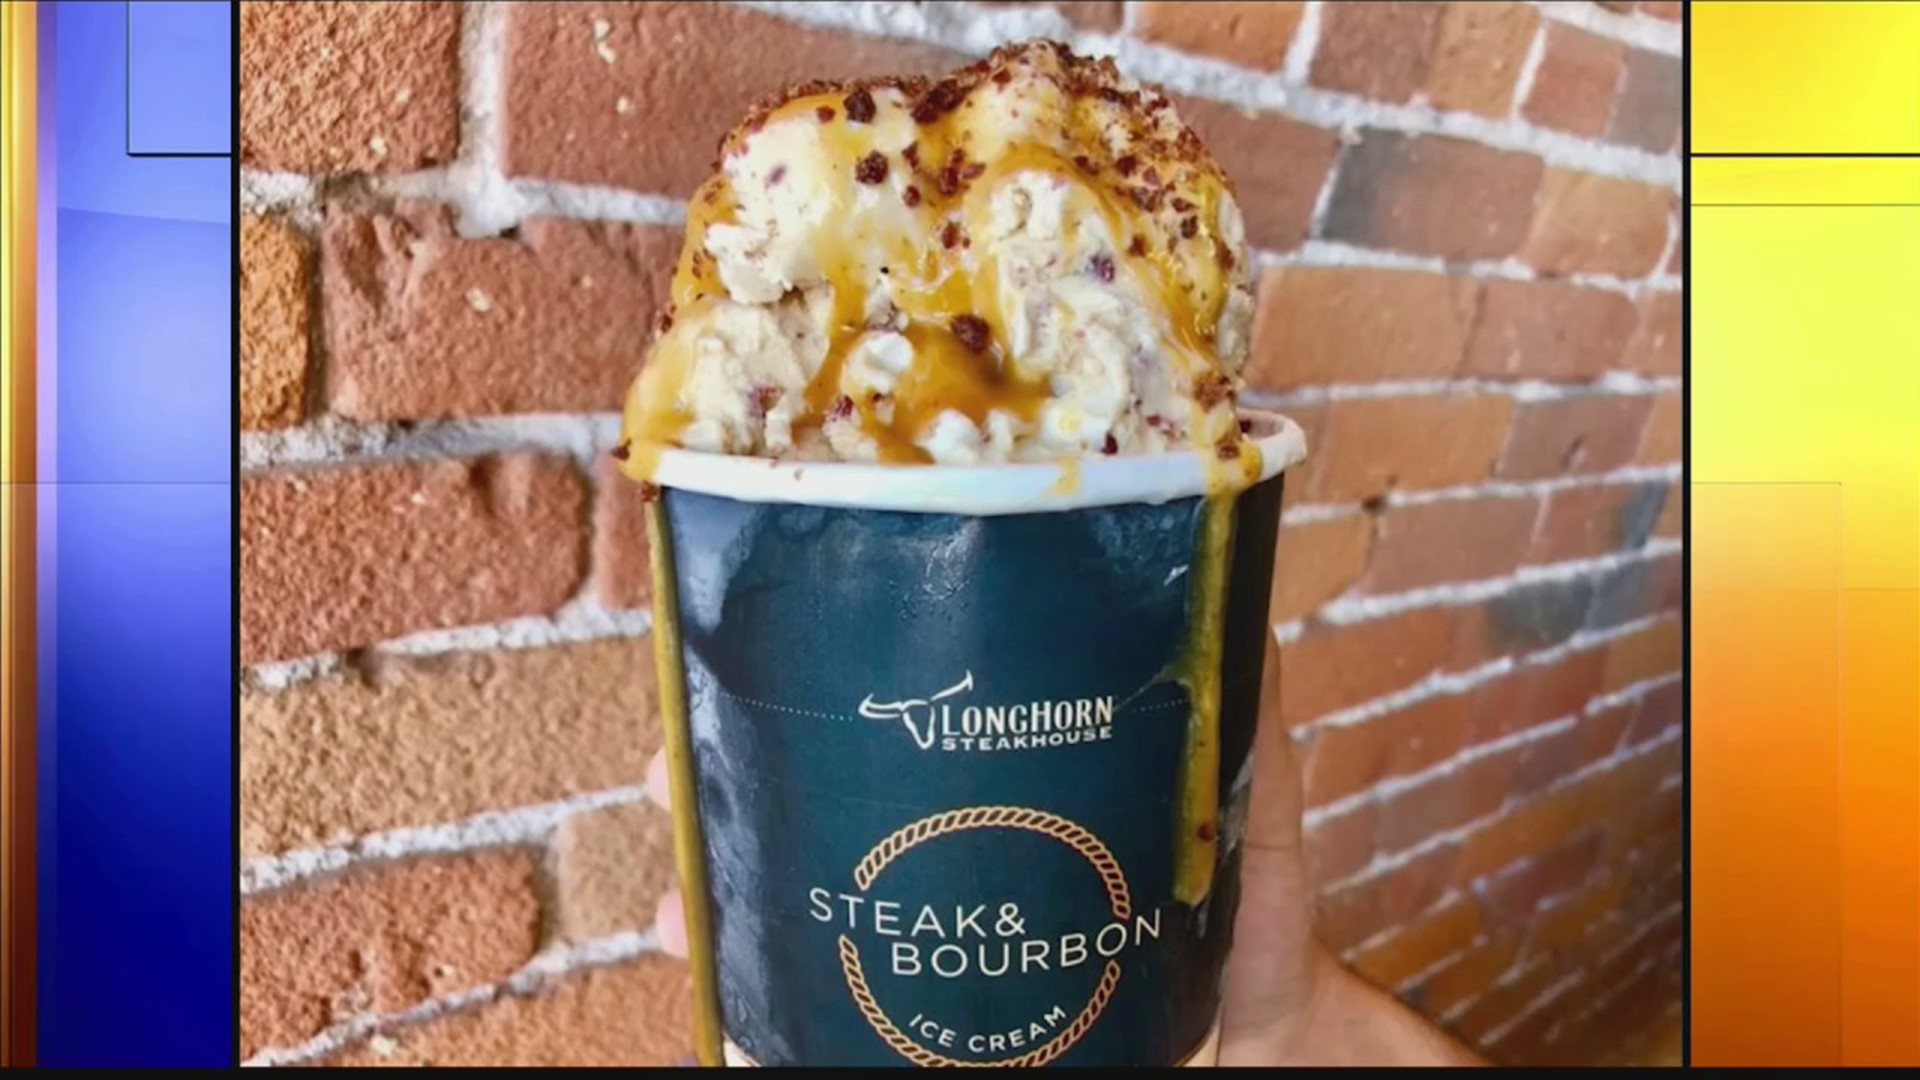 Longhorn Steakhouse has released a bourbon and steak flavored ice cream.